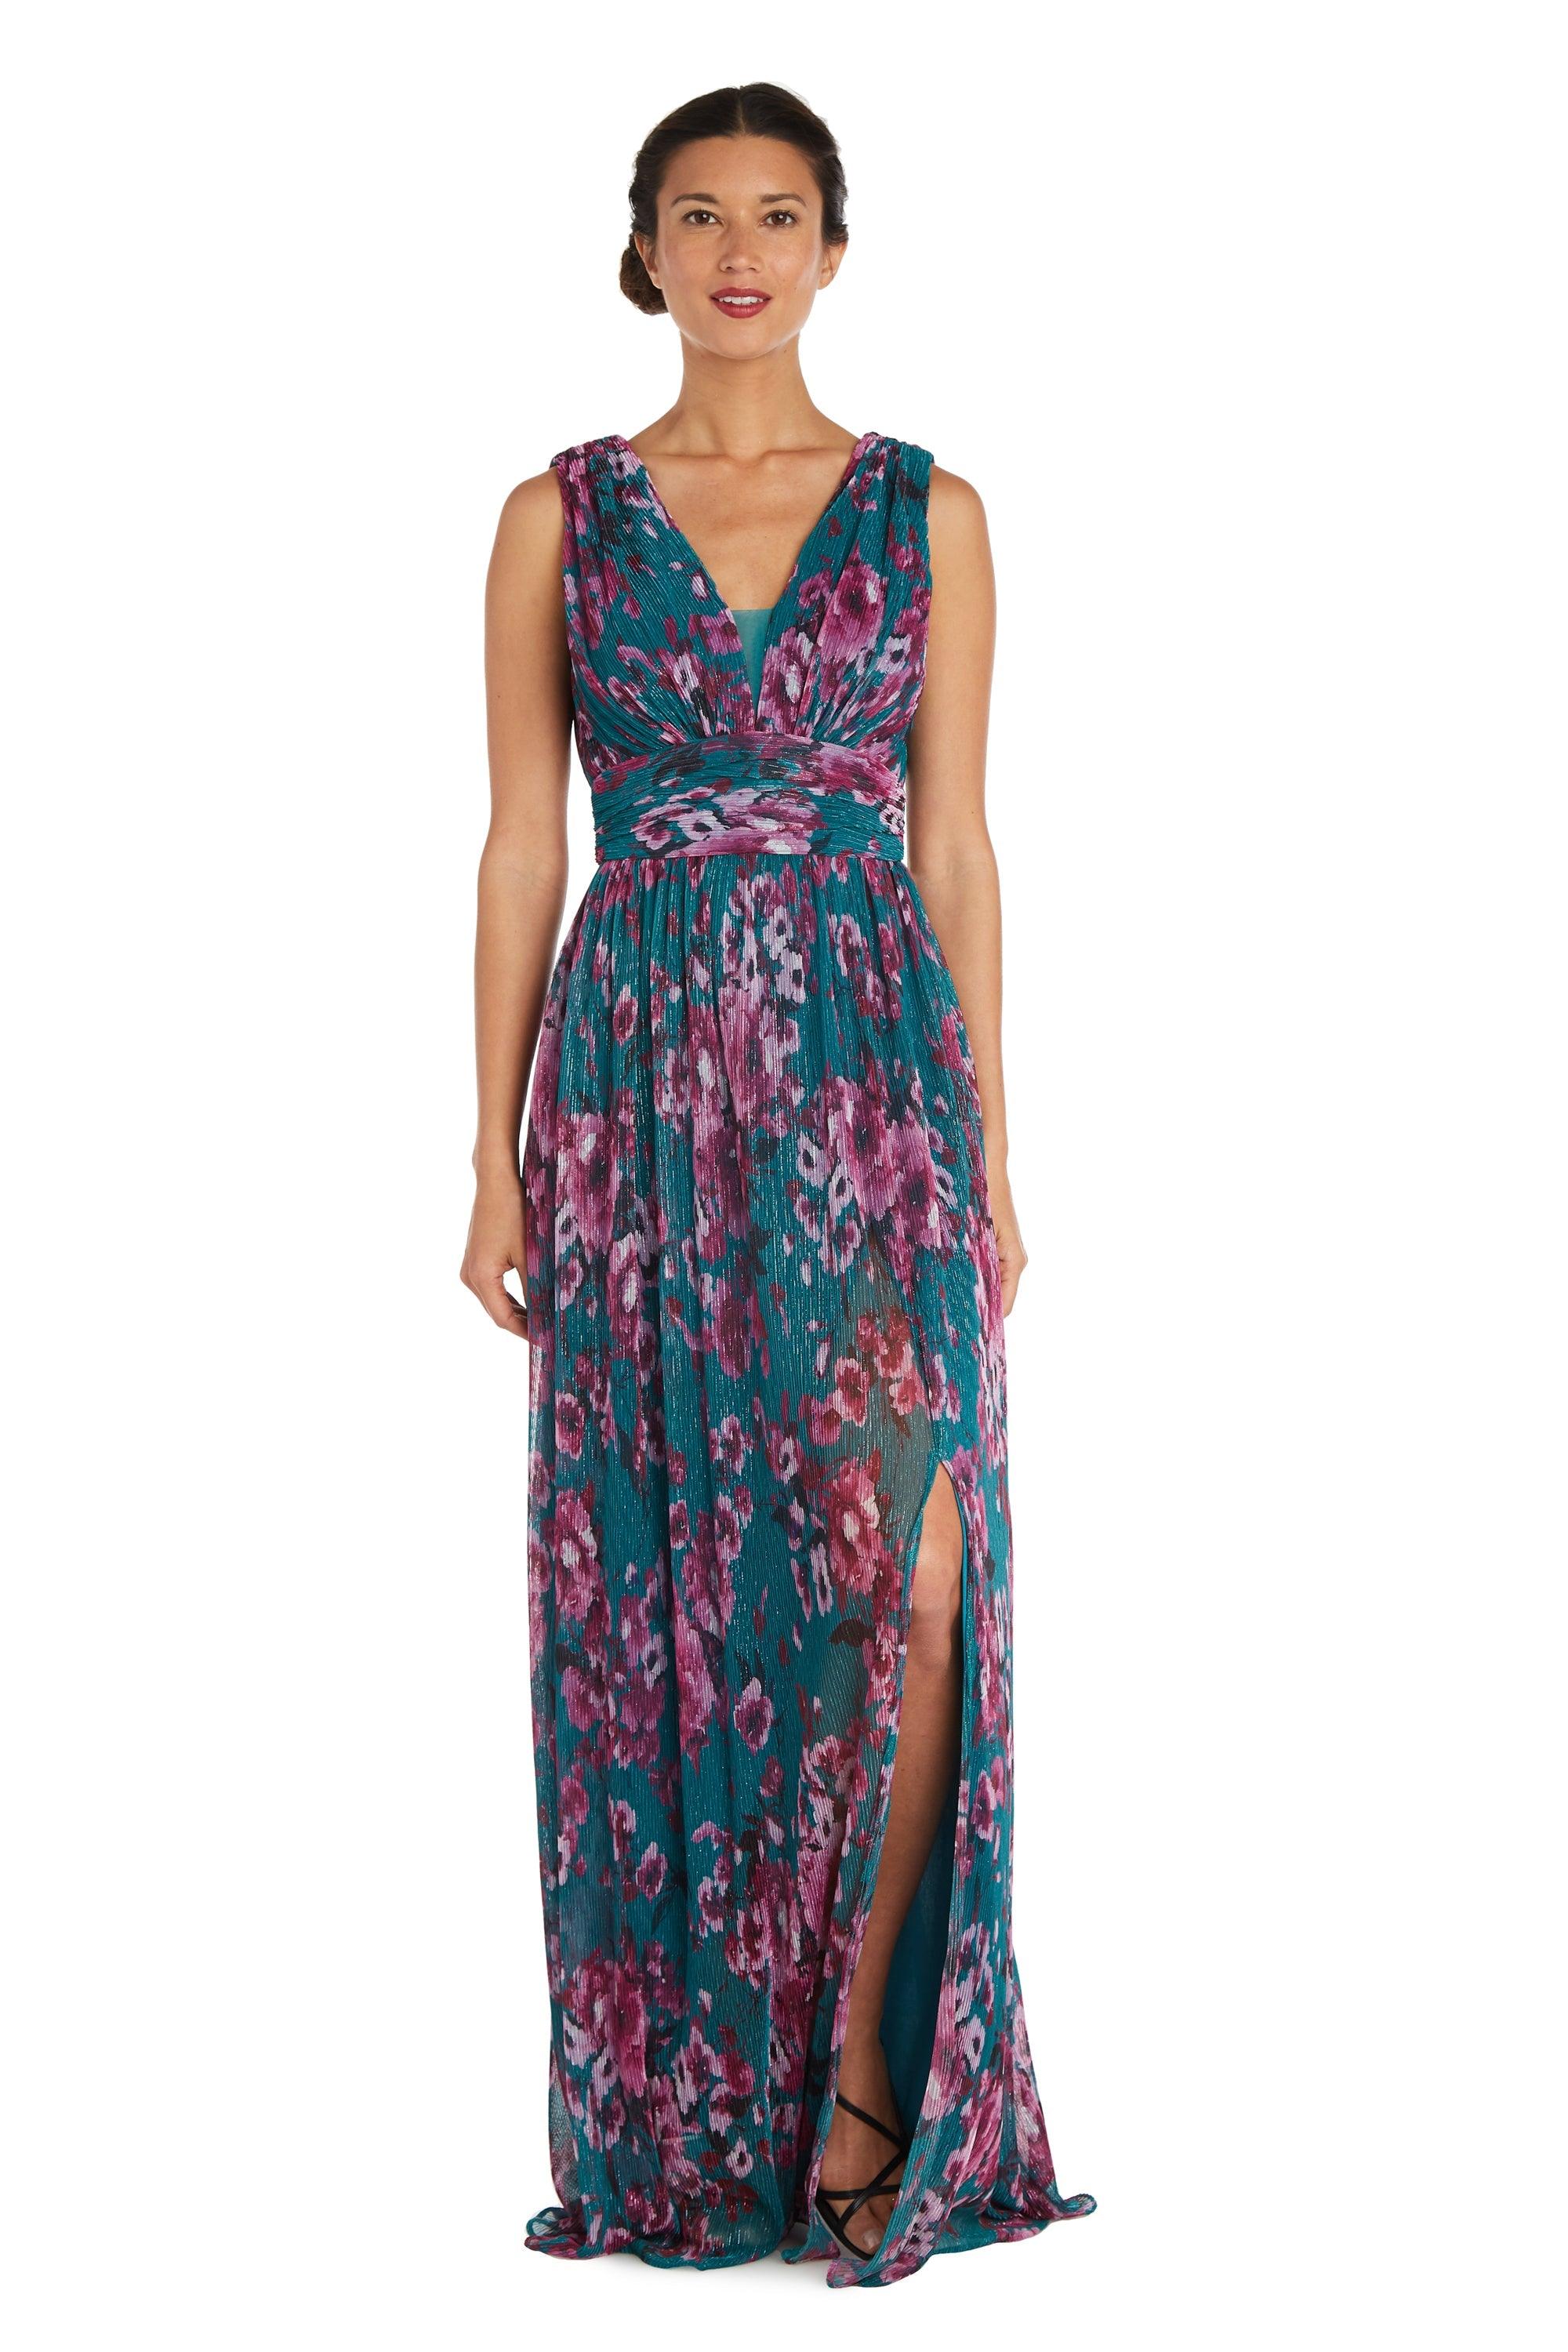 Nightway Long Formal Floral Print Dress 22042 - The Dress Outlet